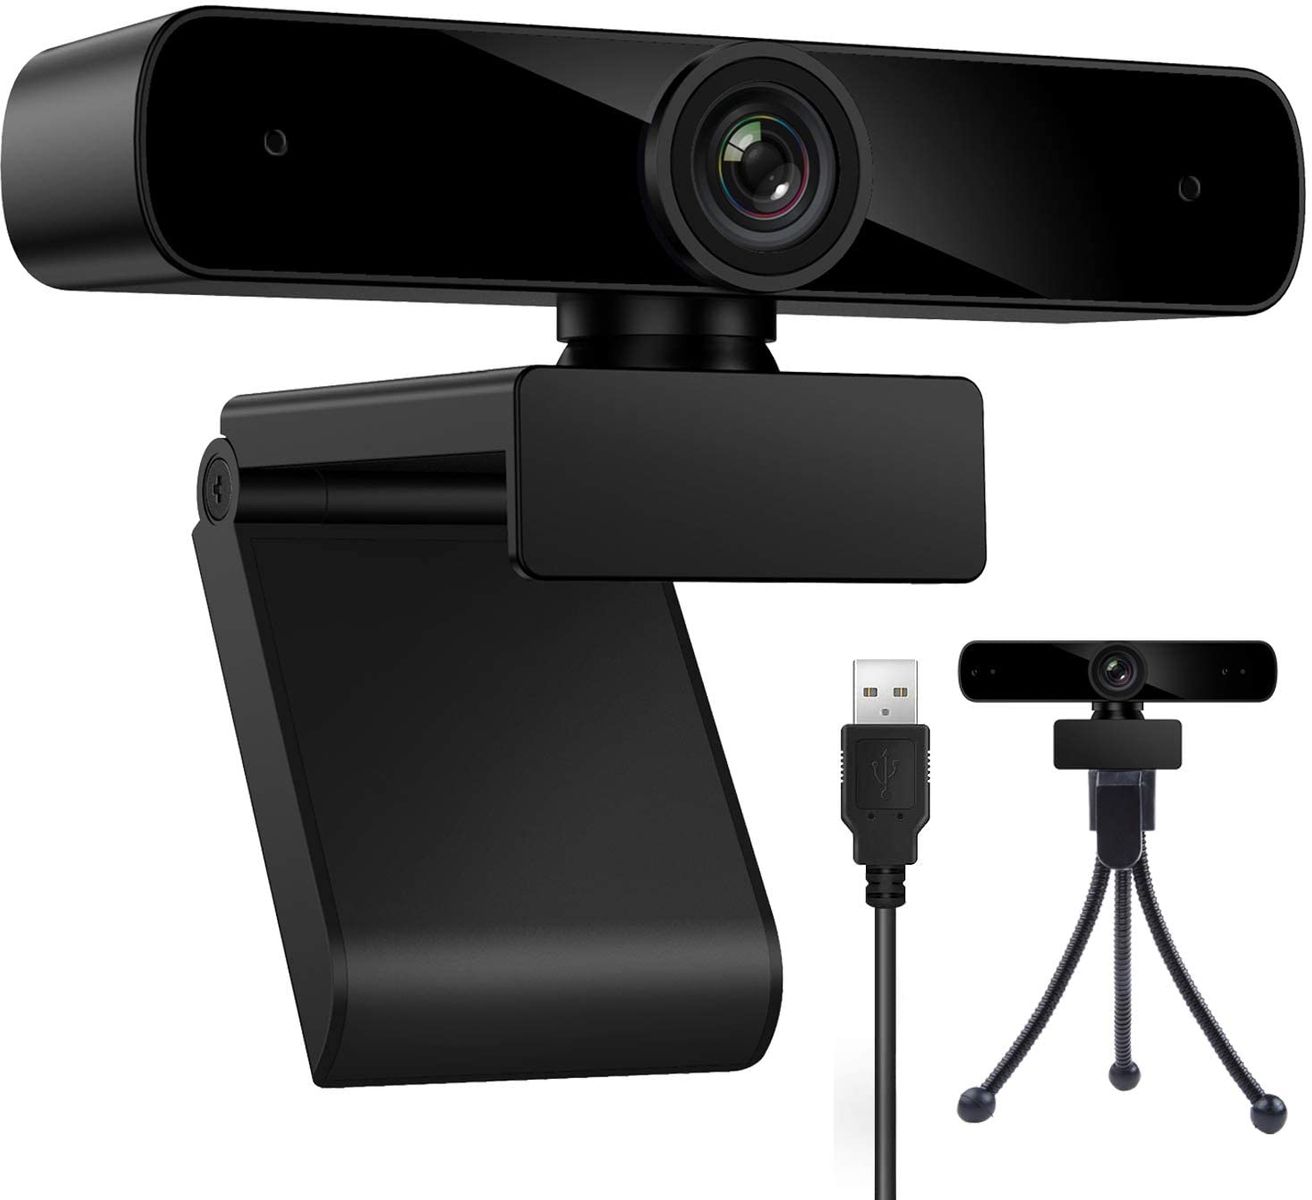 BENEWY Webcam 1080P with microphone, tripod and cover panel, web camera compatible with Windows, Mac and Android